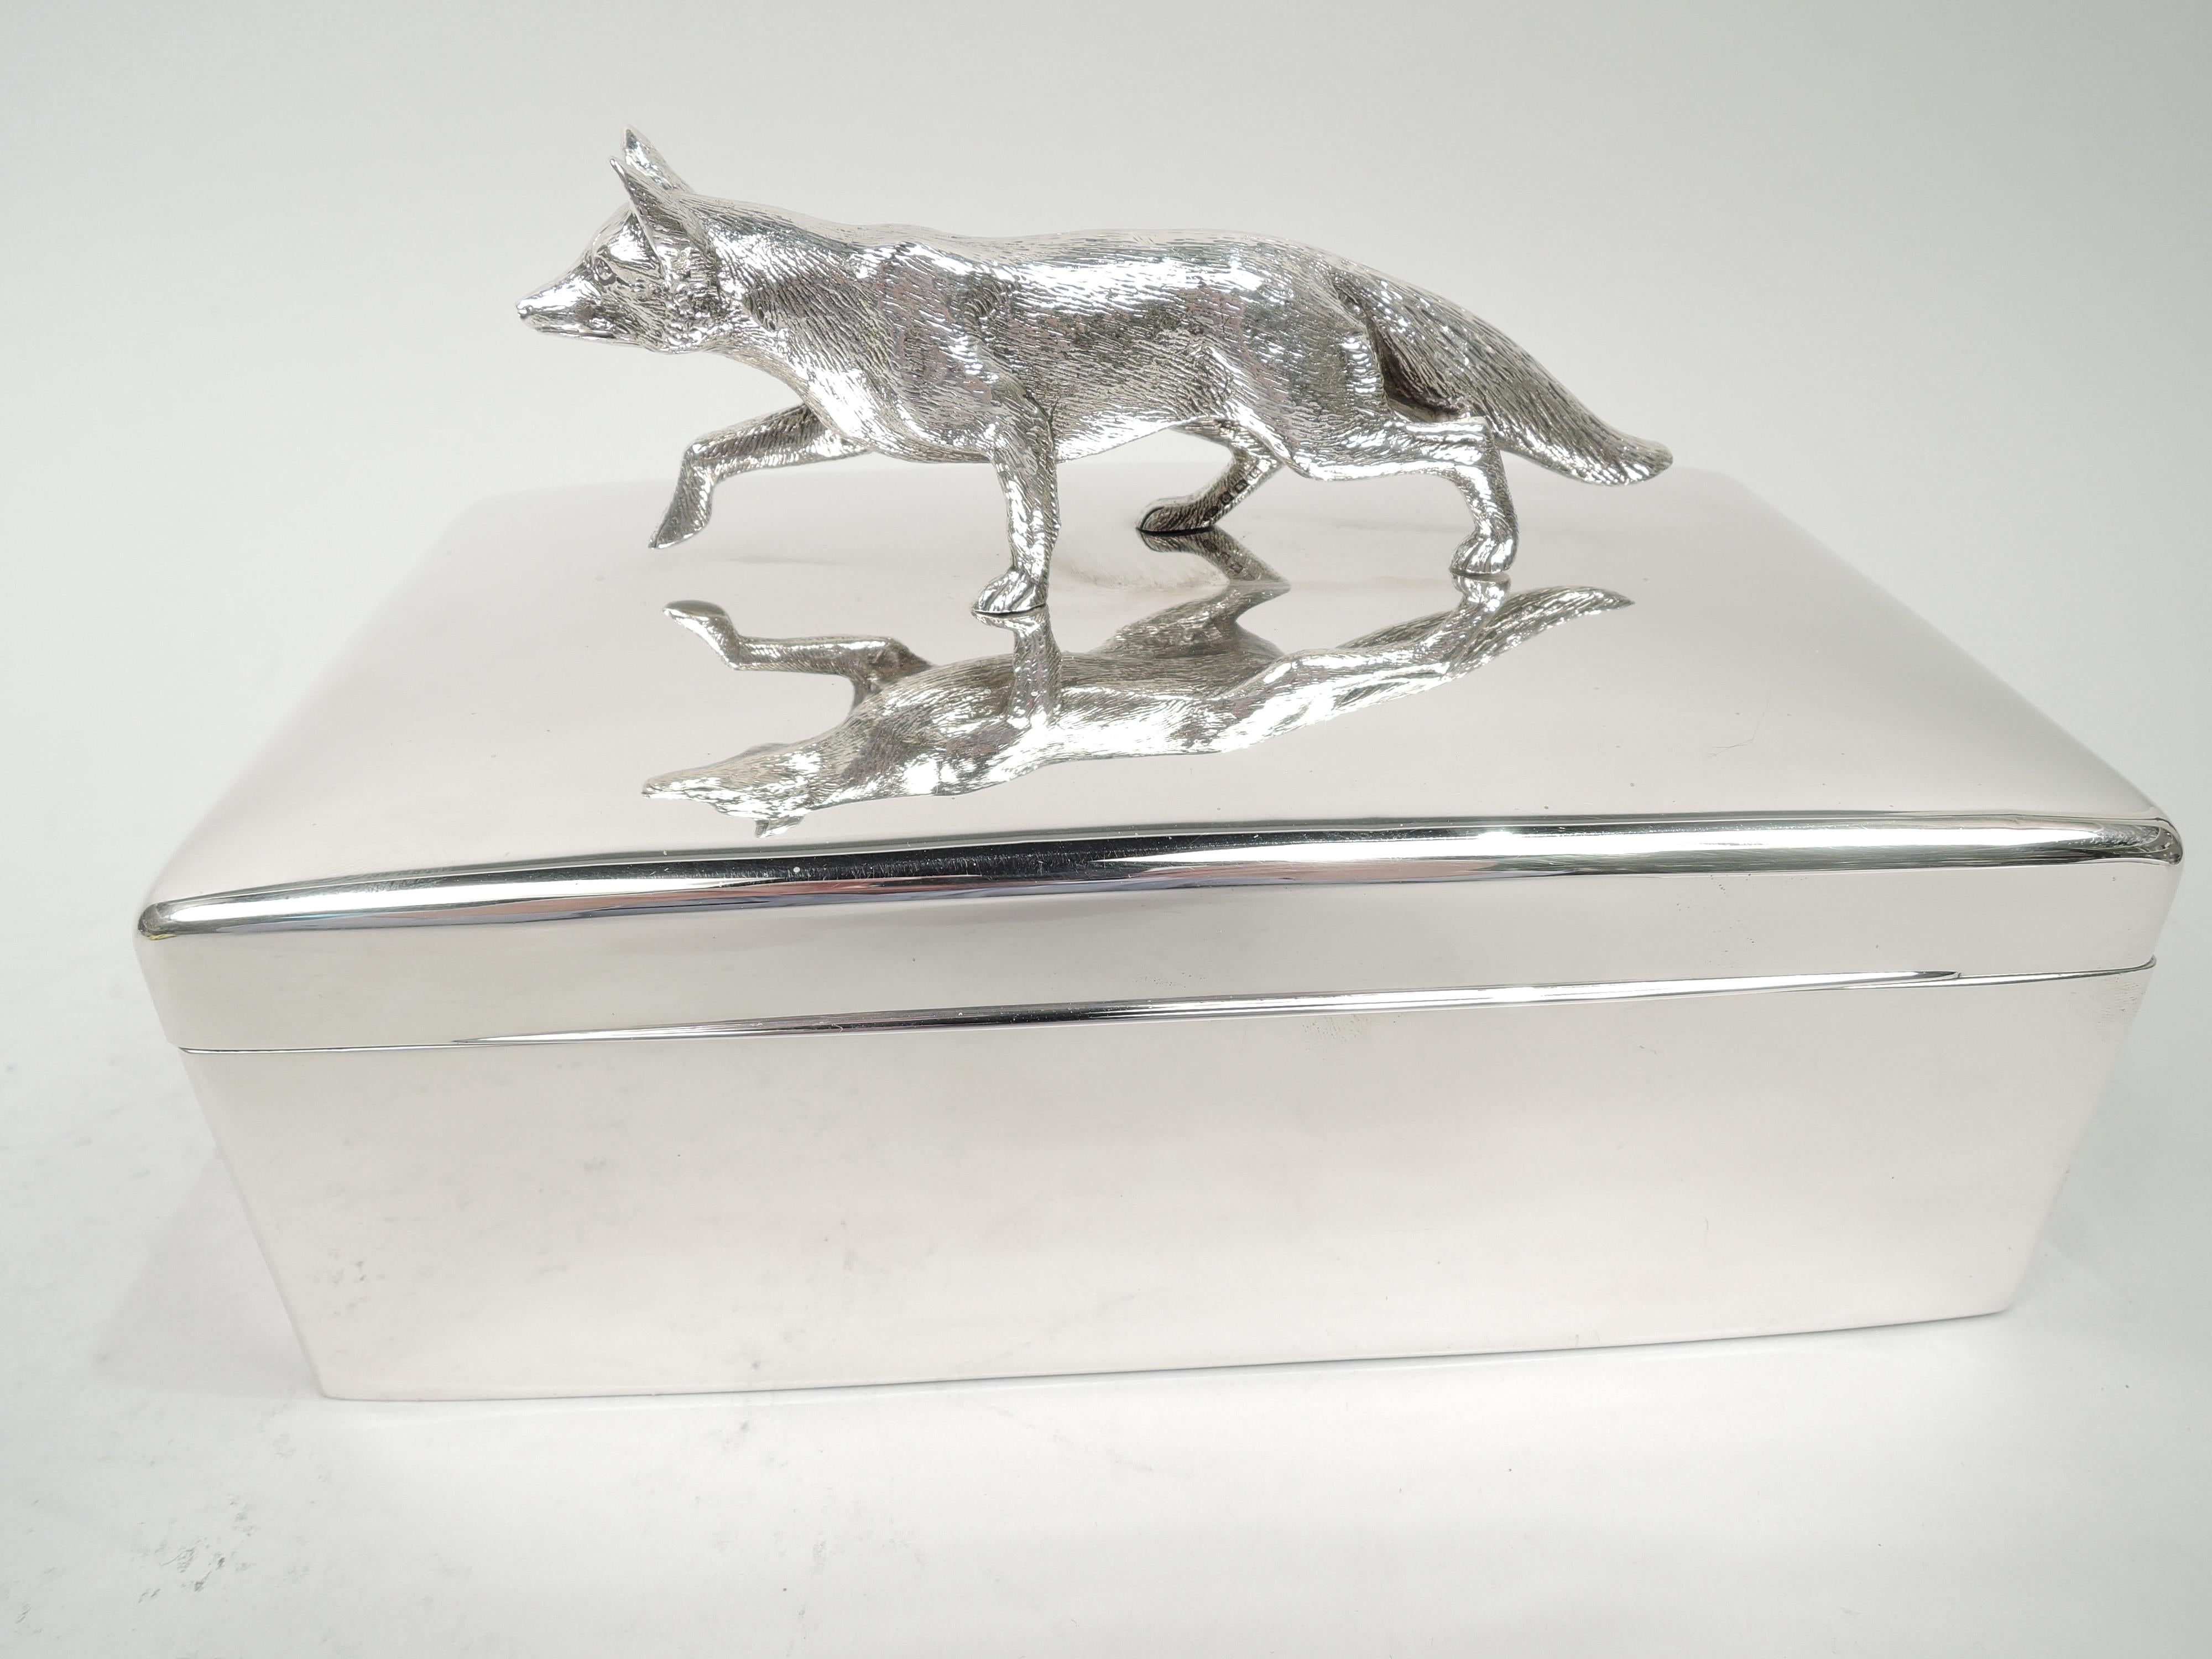 Edwardian sterling silver box. Made by George R. Unite in Birmingham in 1906. Rectangular with straight sides and curved corners. Cover hinged with flat top and tapering tab. Cast finial in form of loping fox with direct stare and alert ears.